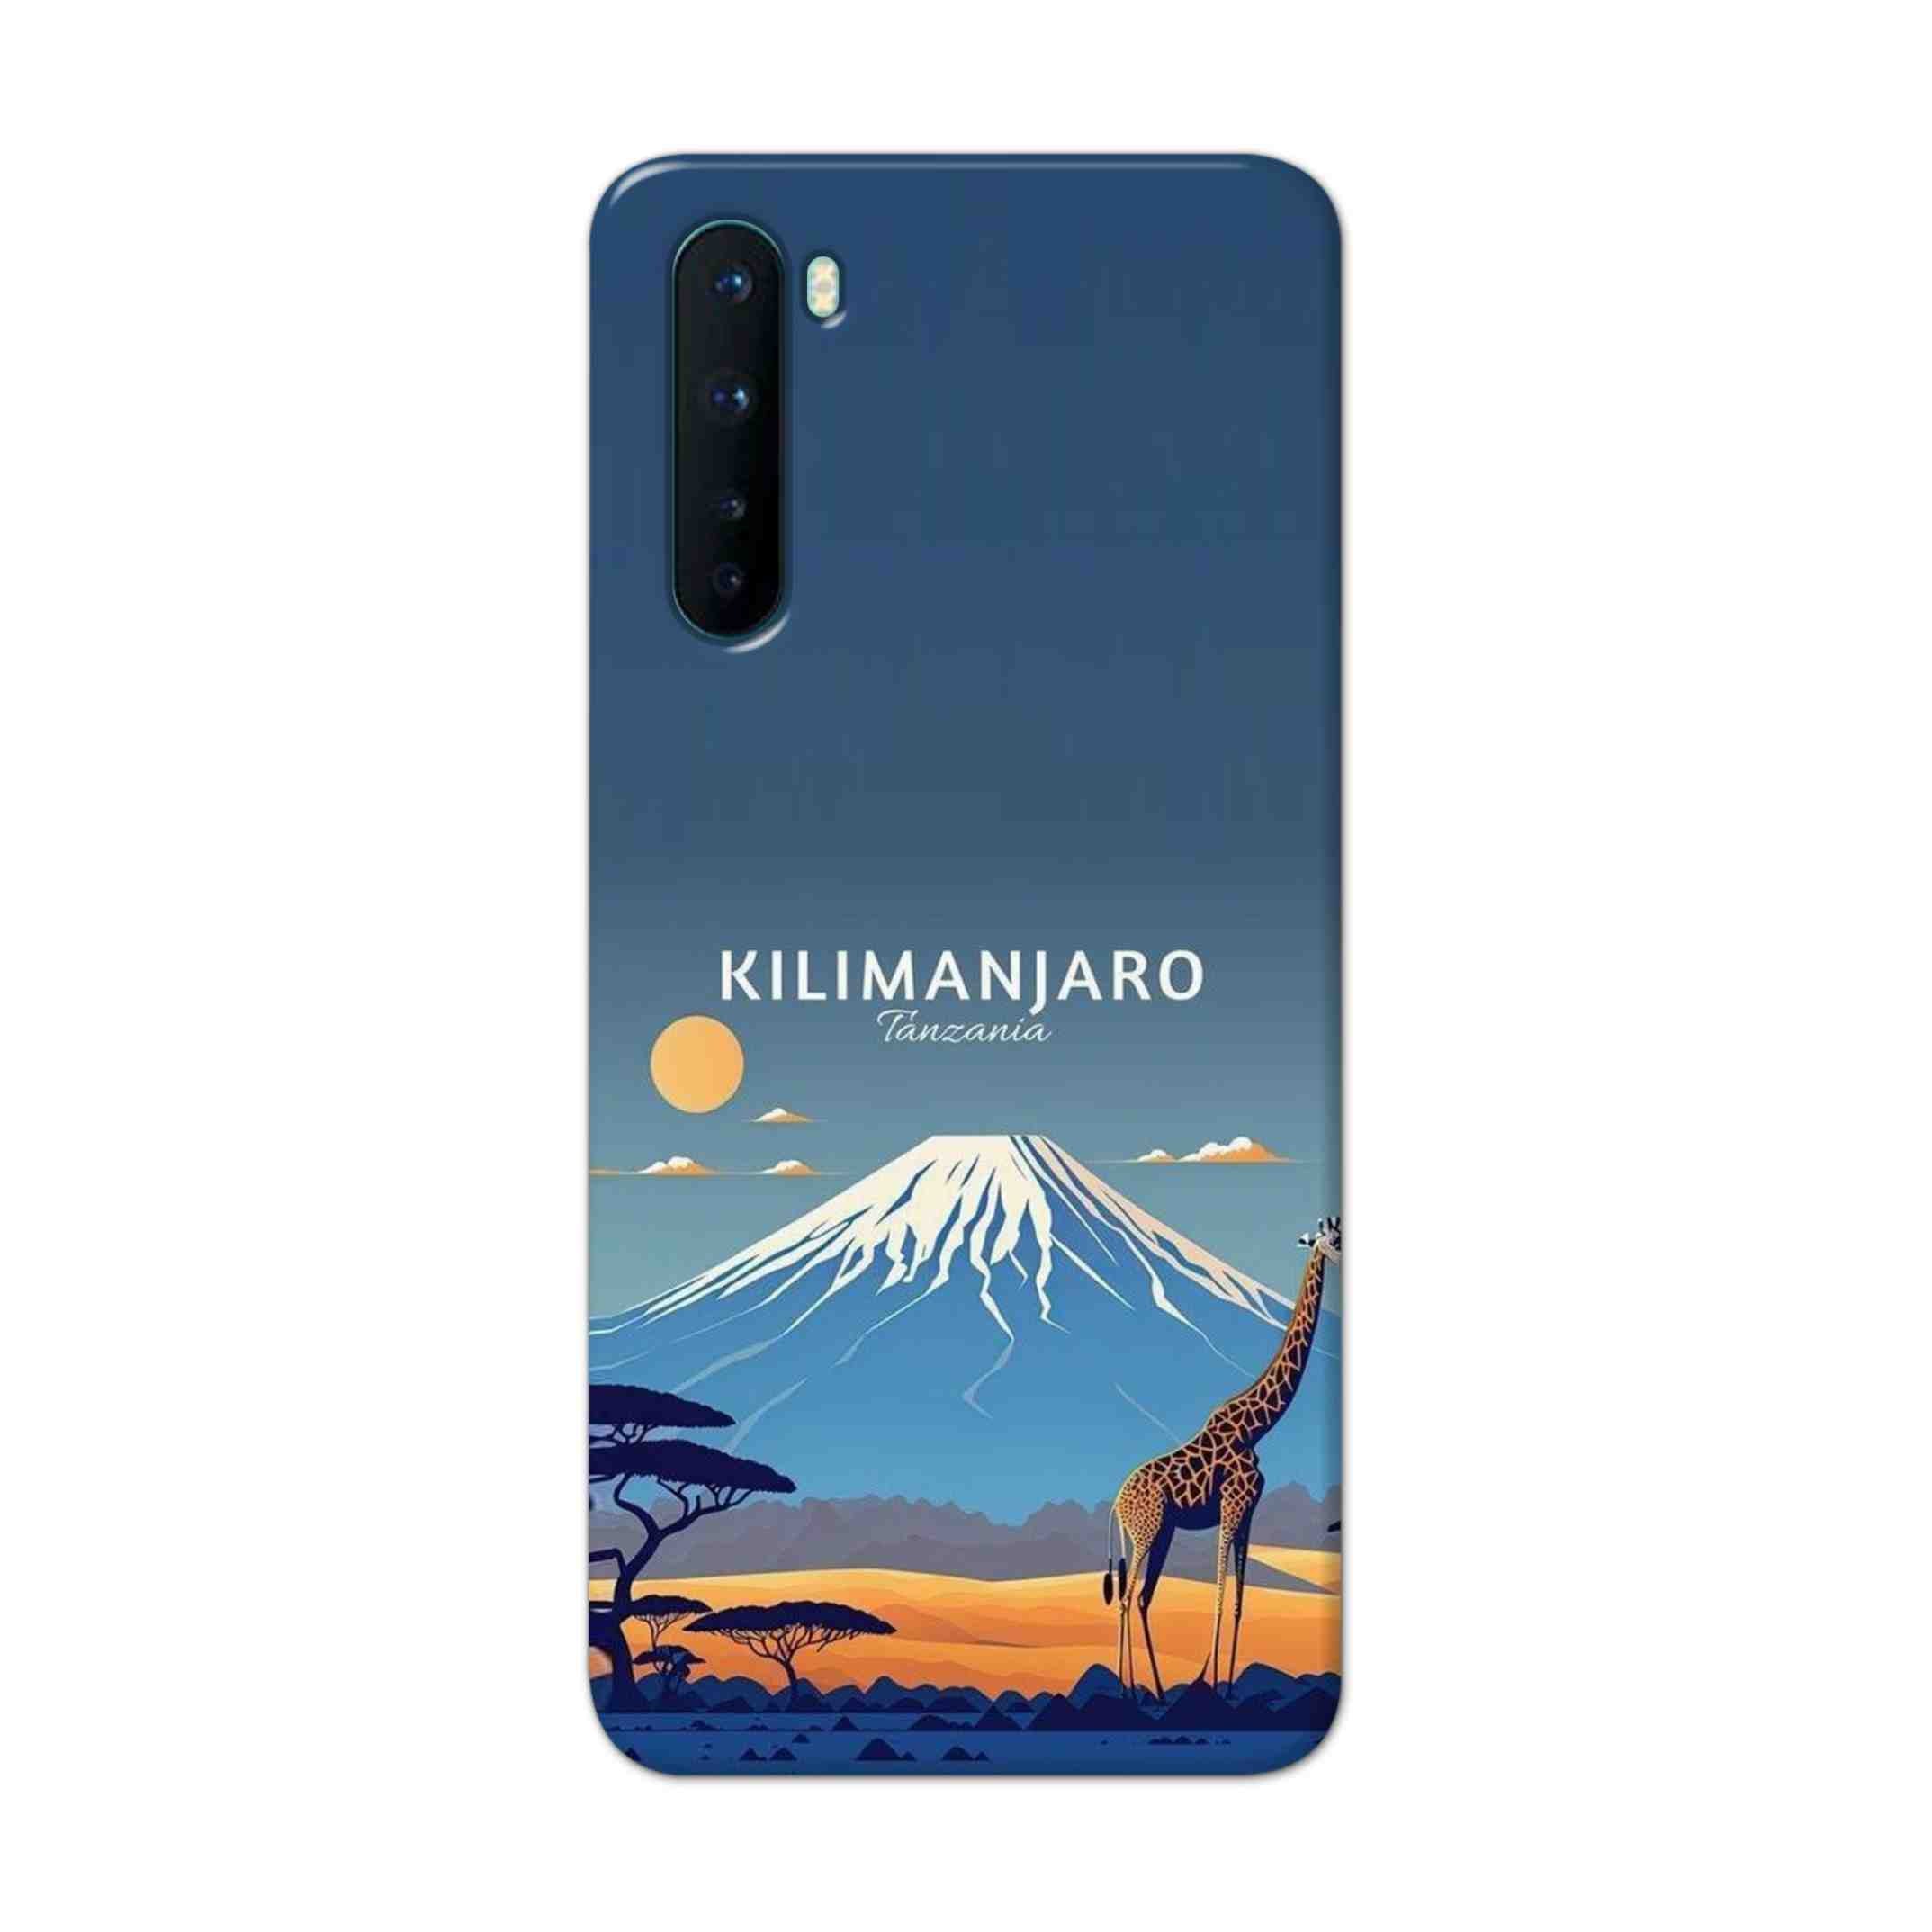 Buy Kilimanjaro Hard Back Mobile Phone Case Cover For OnePlus Nord Online